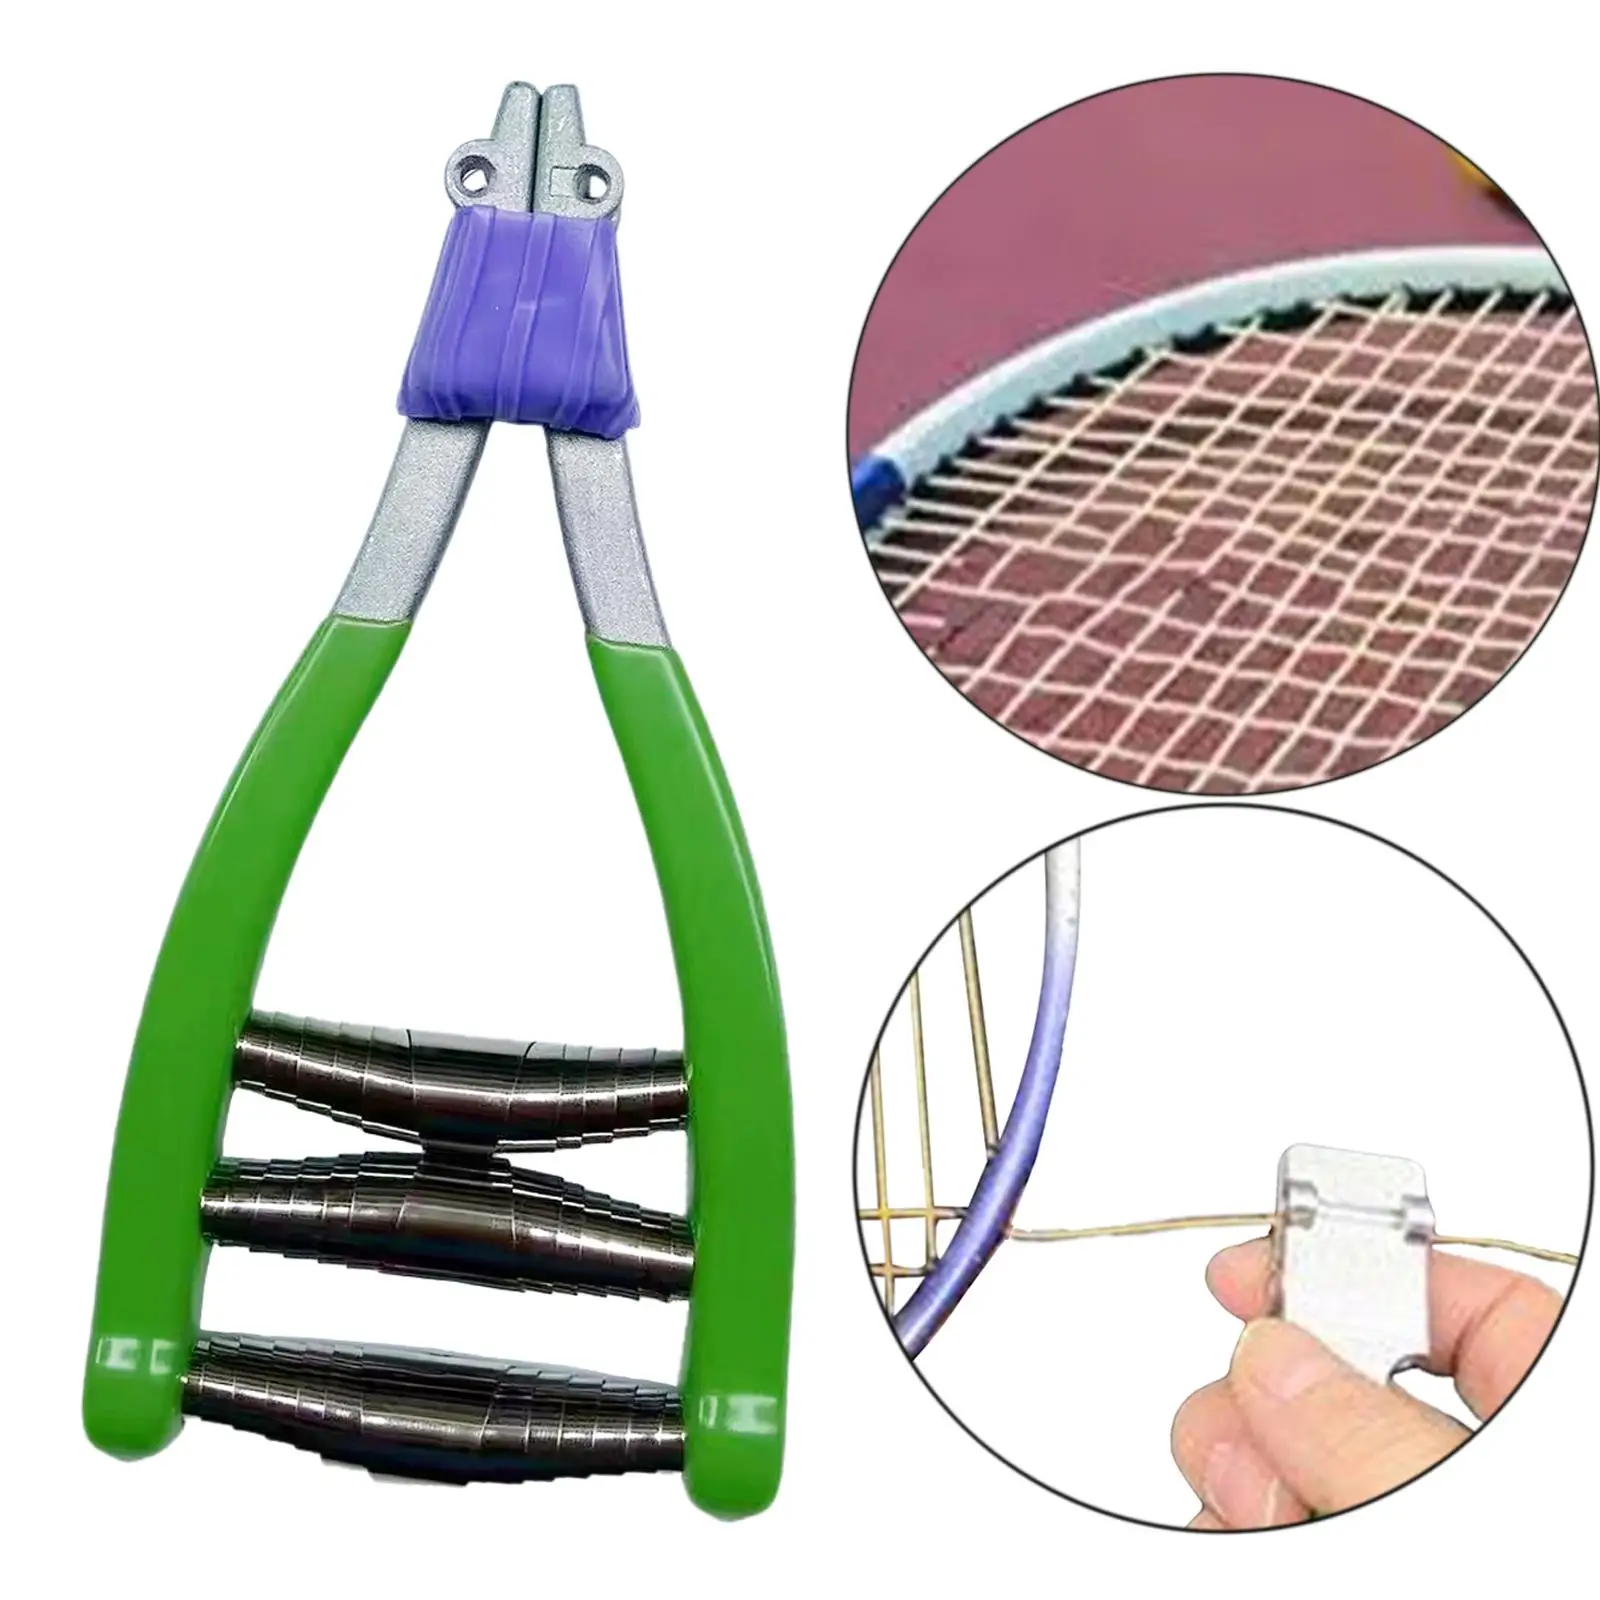 Spring Loaded Sports Starting Clamp Alloy Tennis Badminton Stringing Clamp